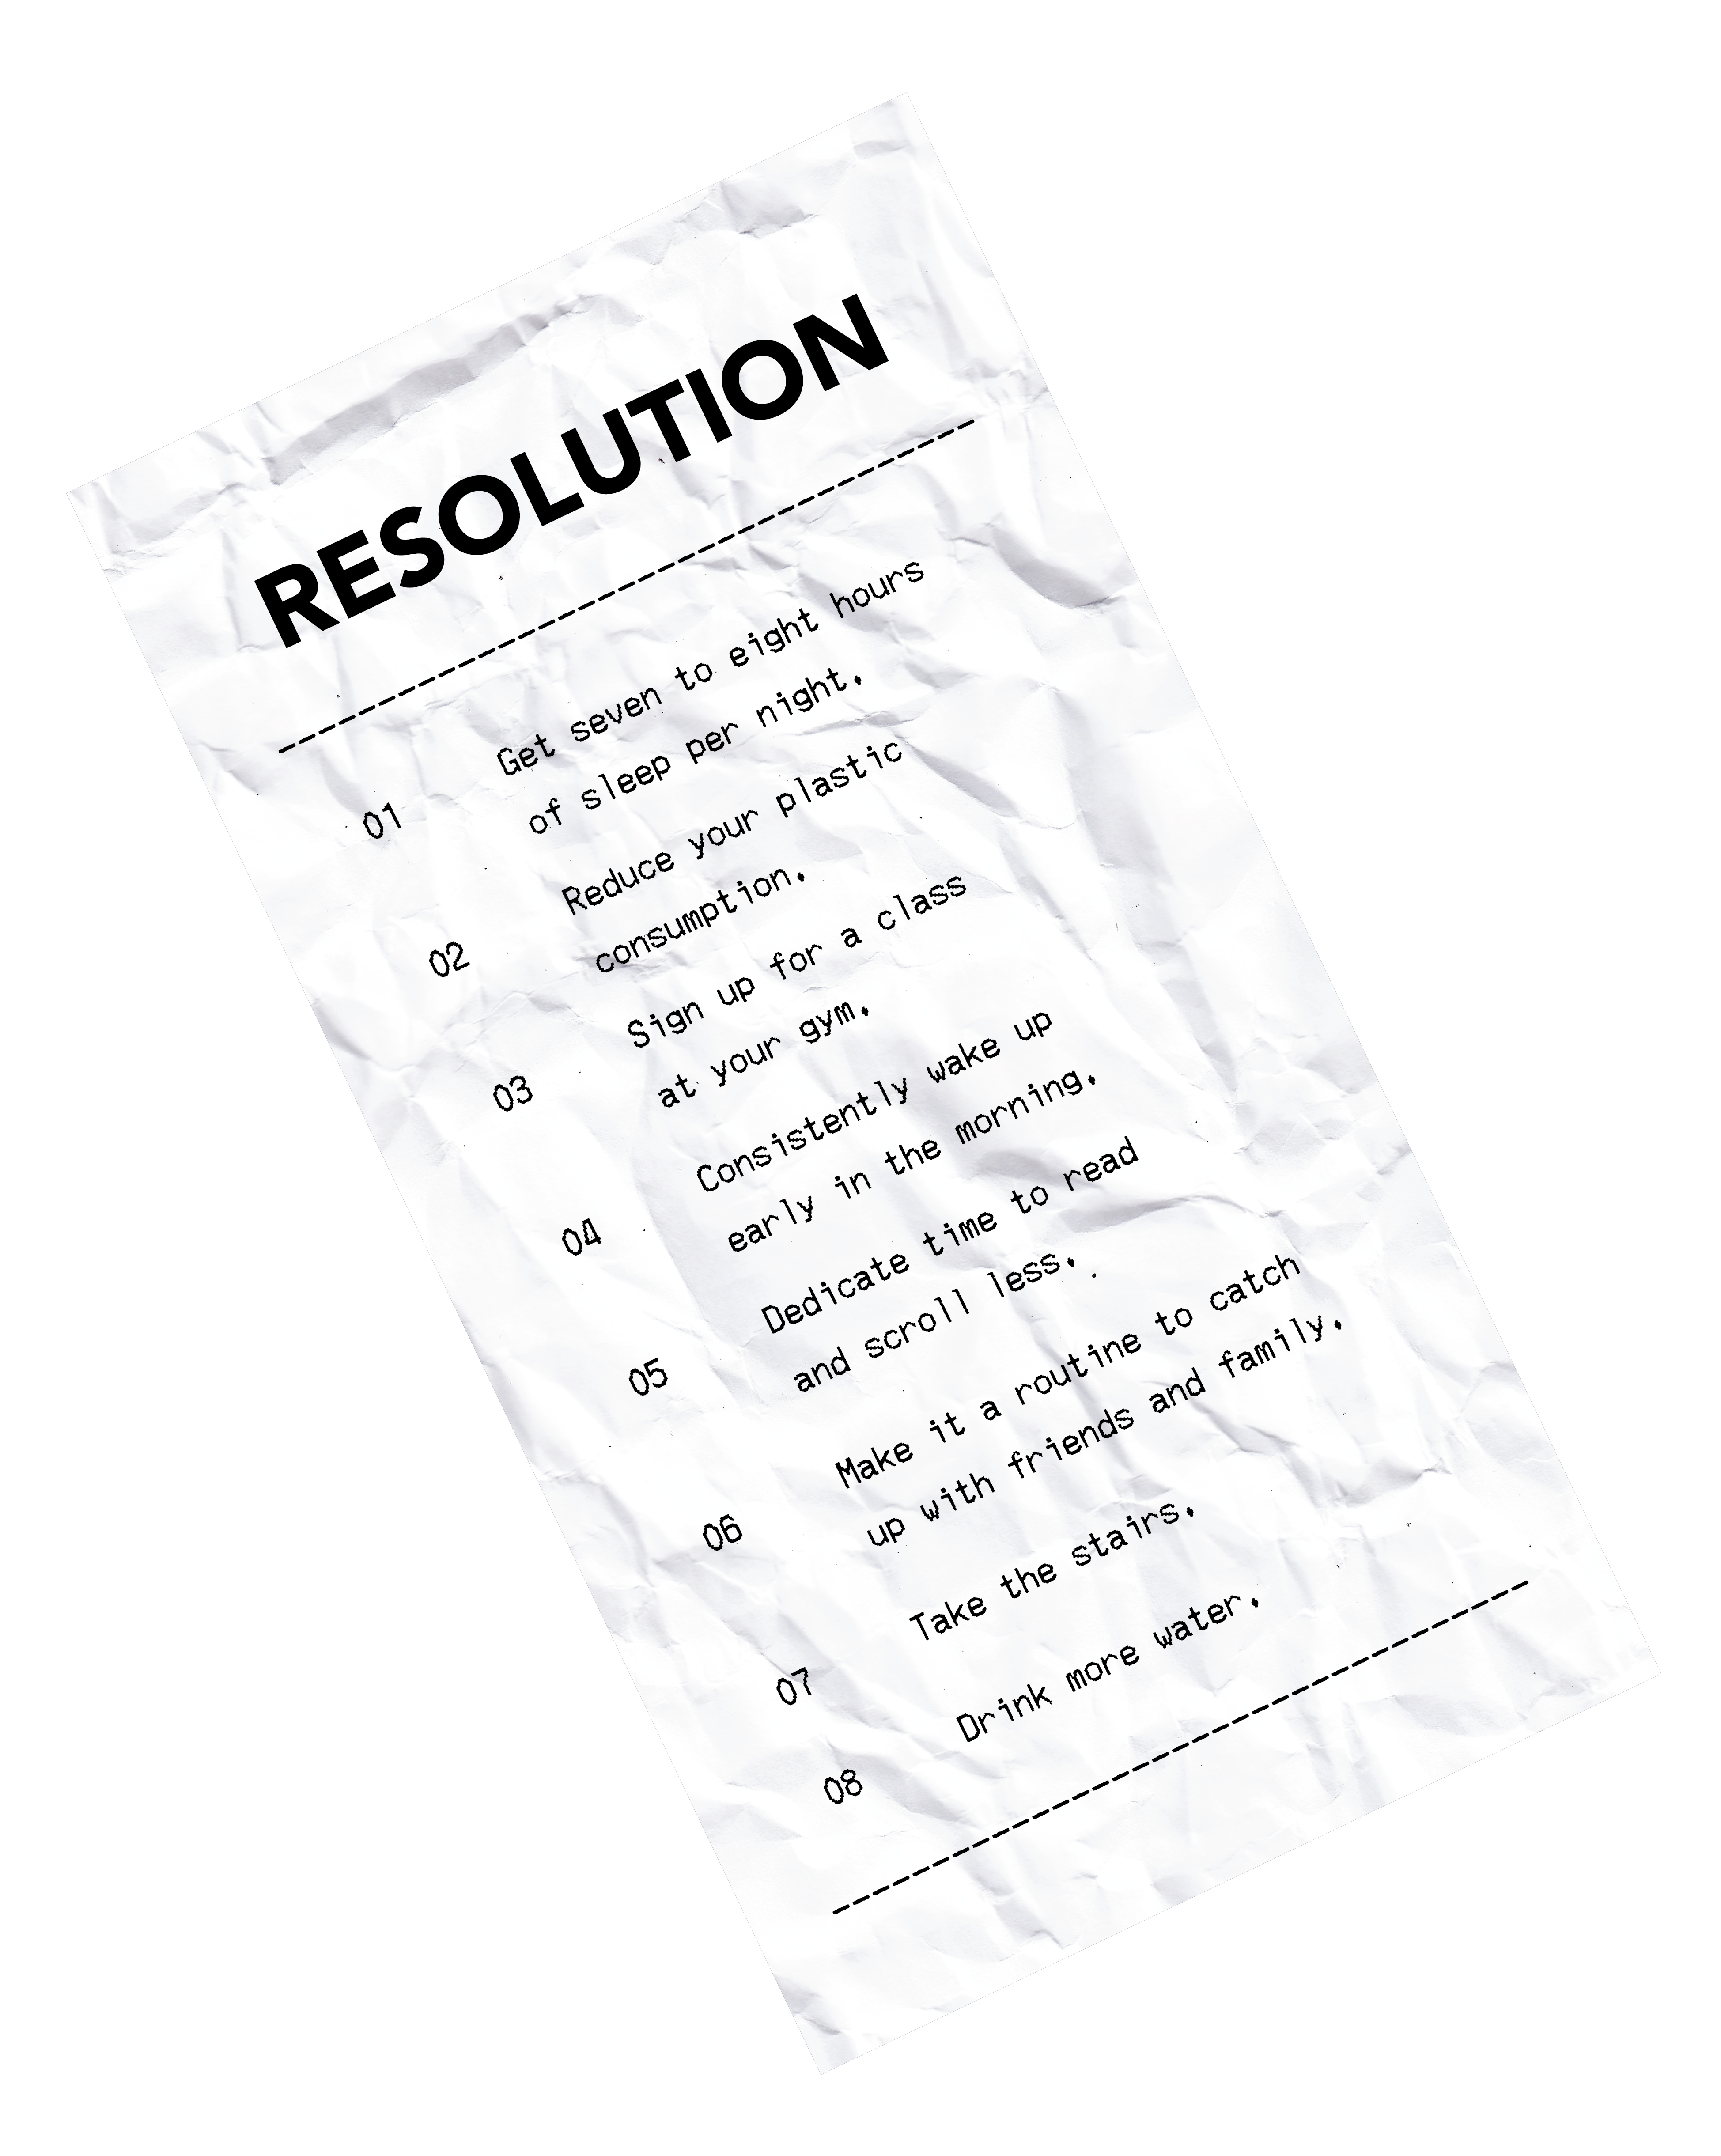 resolution, goal, goal setting, new years resolution, New Years, self reflection